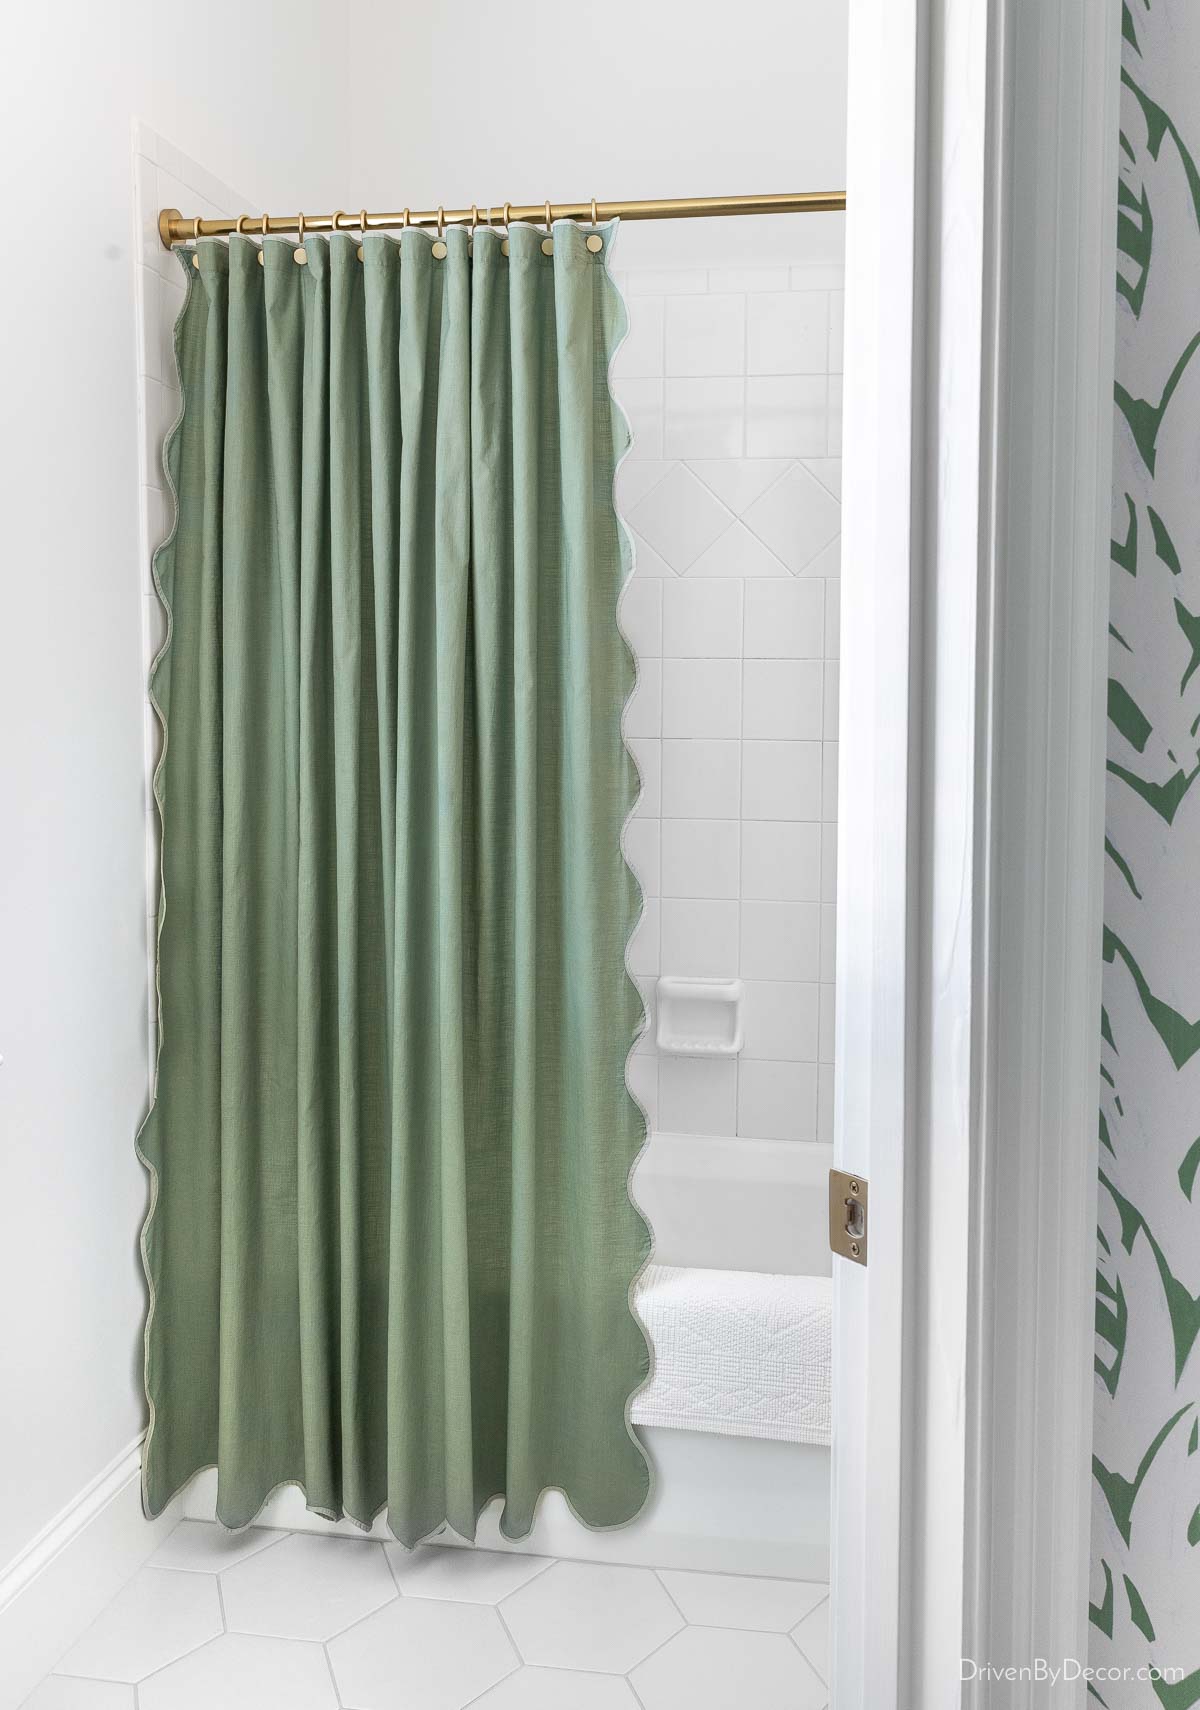 Scalloped green shower curtain with brass rod